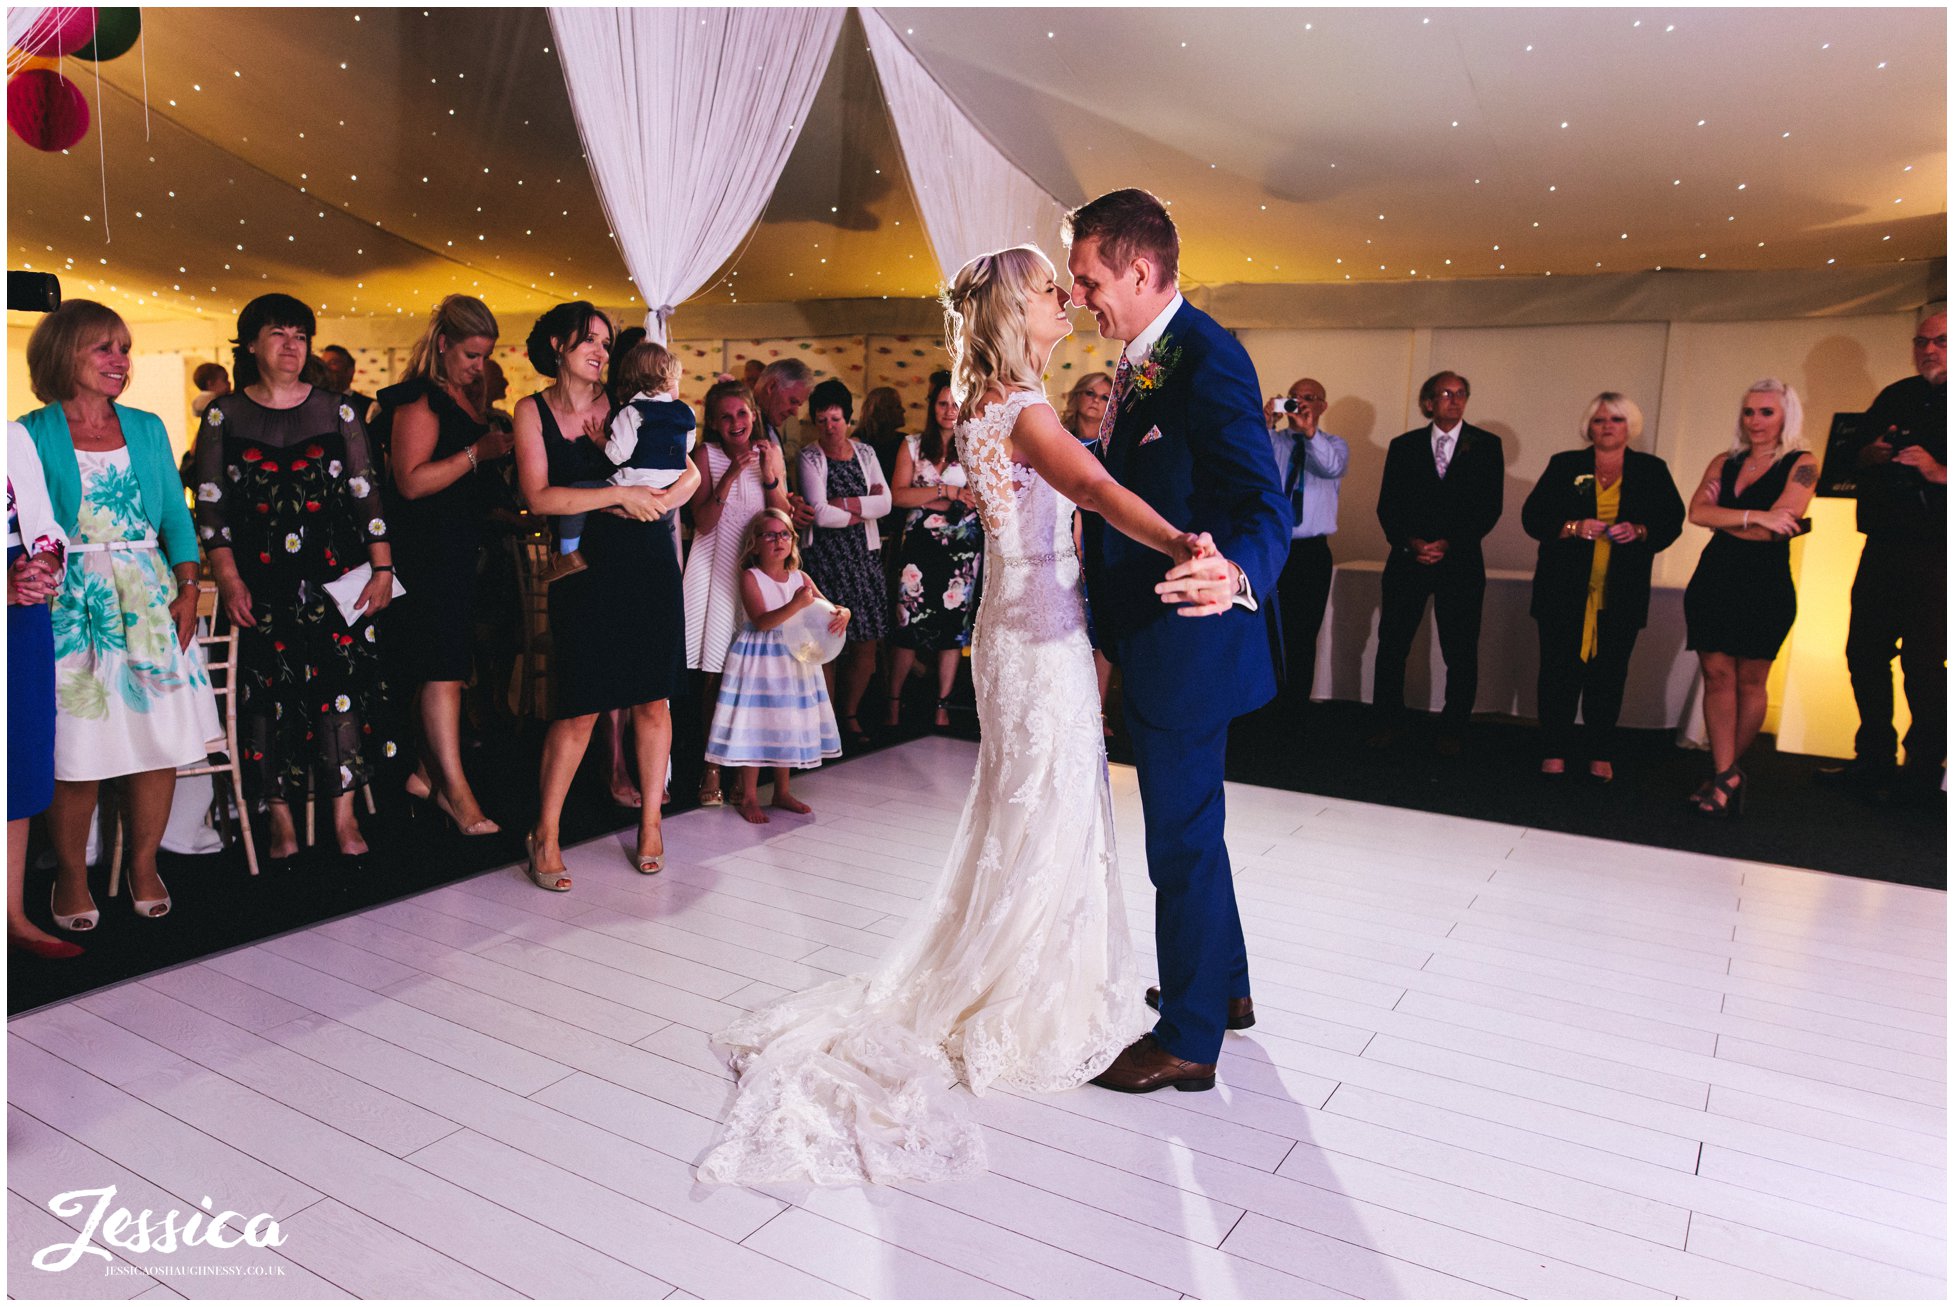 the couple share their first dance at combermere abbey